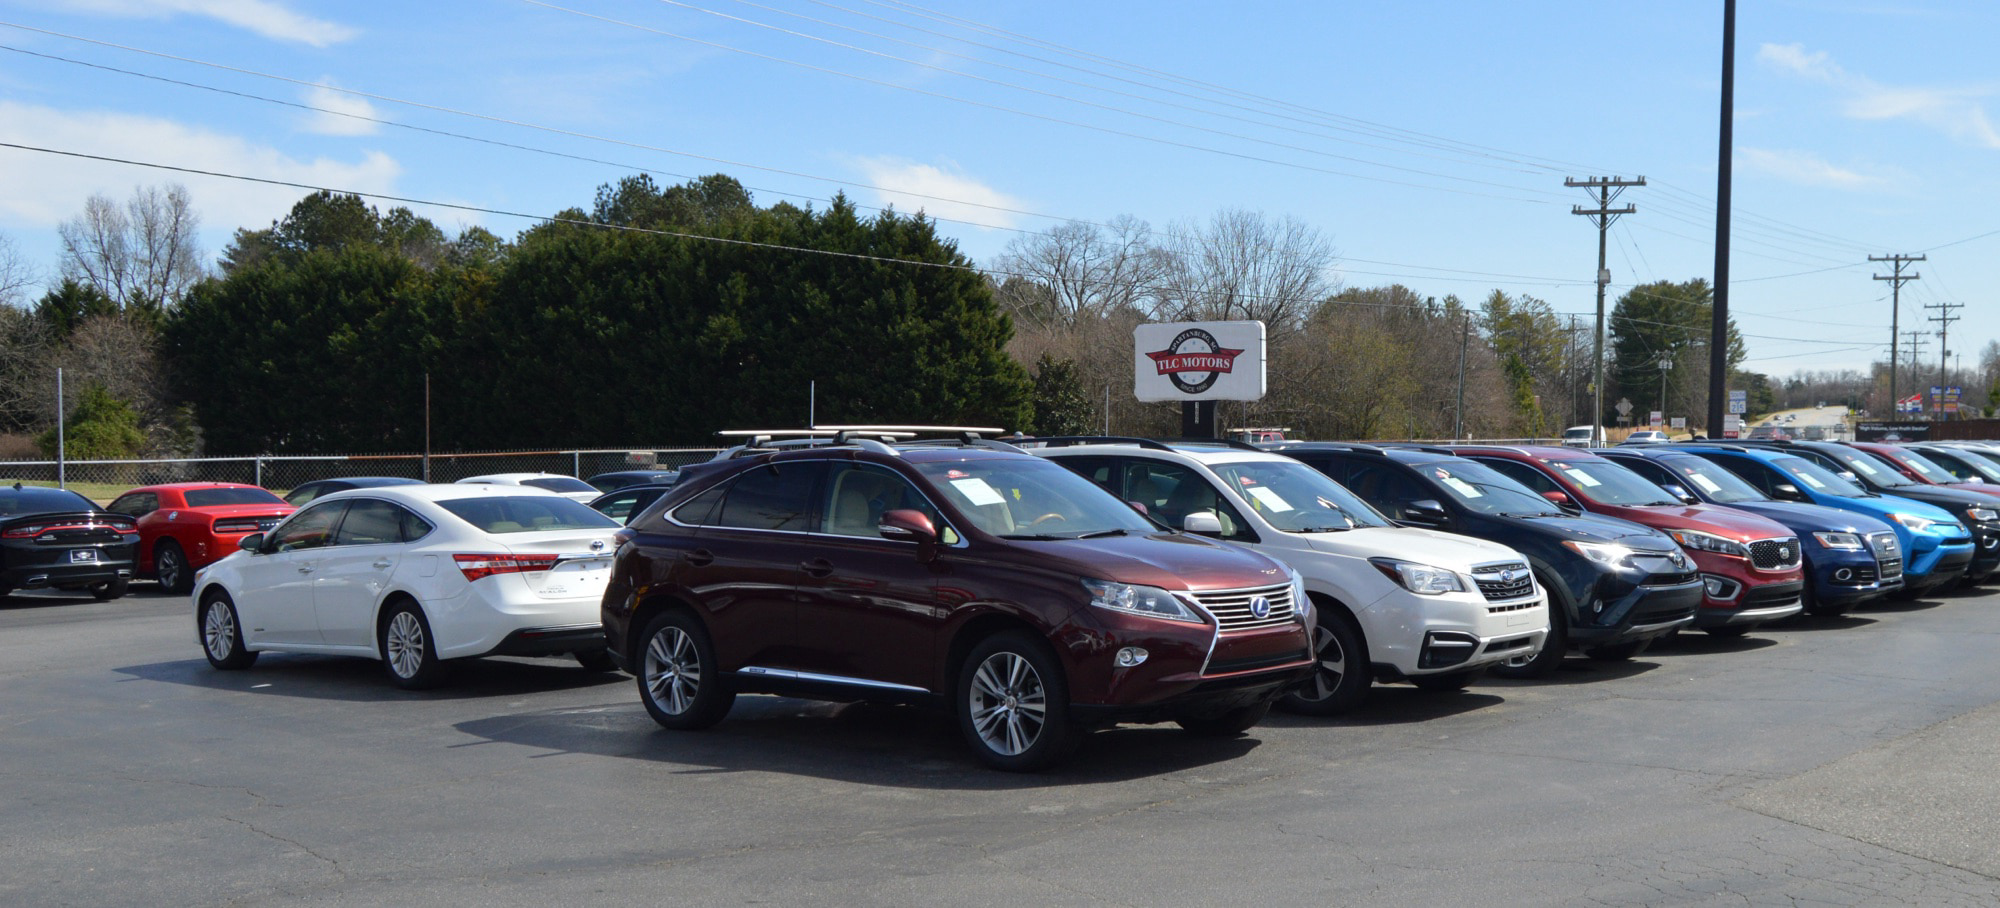 uk3xzgmp_pz5lm on buy here pay here car dealerships greenville nc